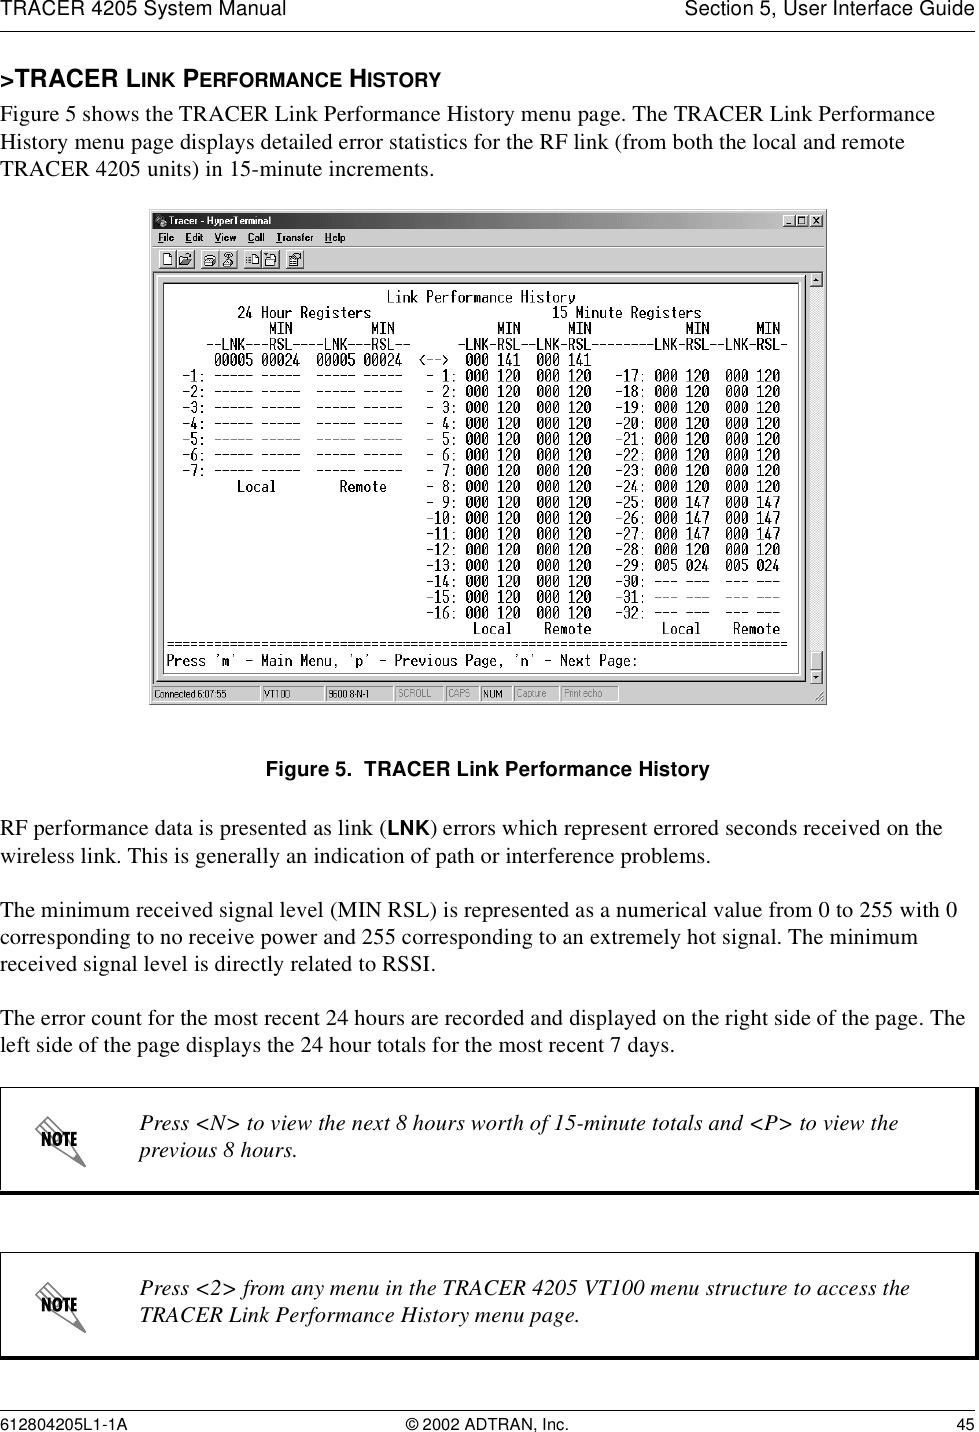 TRACER 4205 System Manual Section 5, User Interface Guide612804205L1-1A © 2002 ADTRAN, Inc. 45&gt;TRACER LINK PERFORMANCE HISTORYFigure 5 shows the TRACER Link Performance History menu page. The TRACER Link Performance History menu page displays detailed error statistics for the RF link (from both the local and remote TRACER 4205 units) in 15-minute increments. Figure 5.  TRACER Link Performance HistoryRF performance data is presented as link (LNK) errors which represent errored seconds received on the wireless link. This is generally an indication of path or interference problems.The minimum received signal level (MIN RSL) is represented as a numerical value from 0 to 255 with 0 corresponding to no receive power and 255 corresponding to an extremely hot signal. The minimum received signal level is directly related to RSSI.The error count for the most recent 24 hours are recorded and displayed on the right side of the page. The left side of the page displays the 24 hour totals for the most recent 7 days. Press &lt;N&gt; to view the next 8 hours worth of 15-minute totals and &lt;P&gt; to view the previous 8 hours.Press &lt;2&gt; from any menu in the TRACER 4205 VT100 menu structure to access the TRACER Link Performance History menu page.